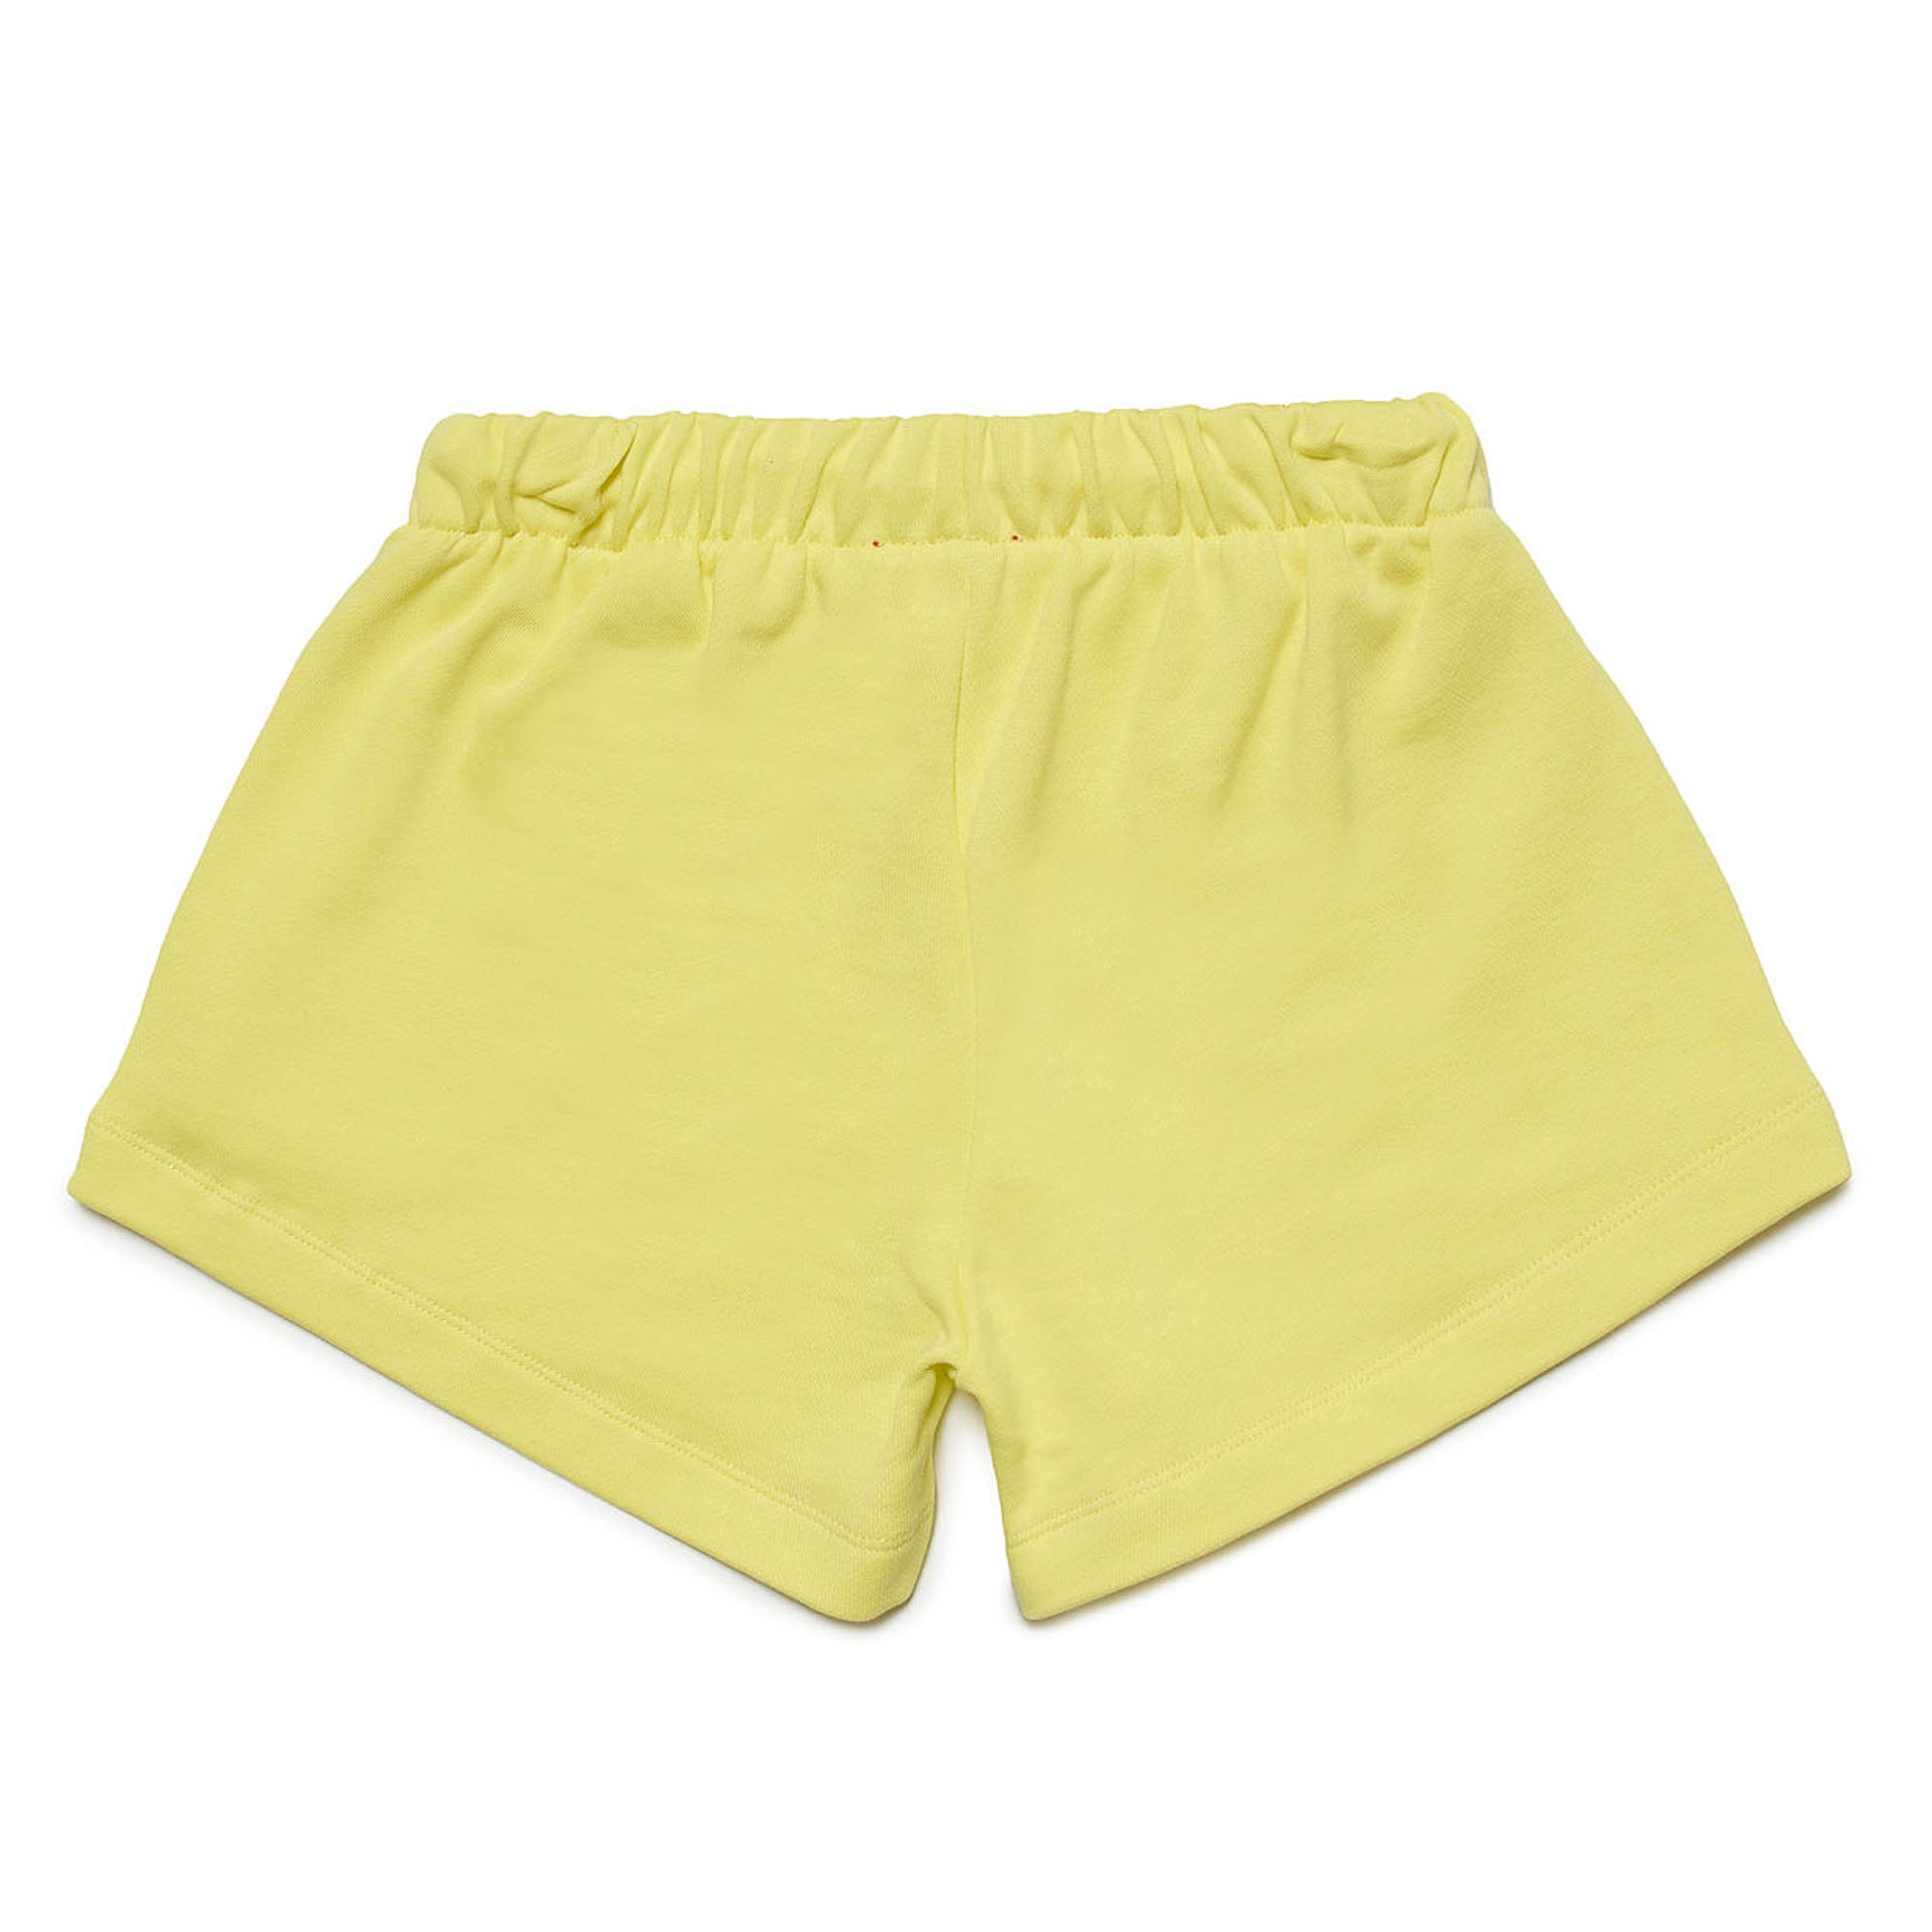 Diesel Paglife Yellow Shorts